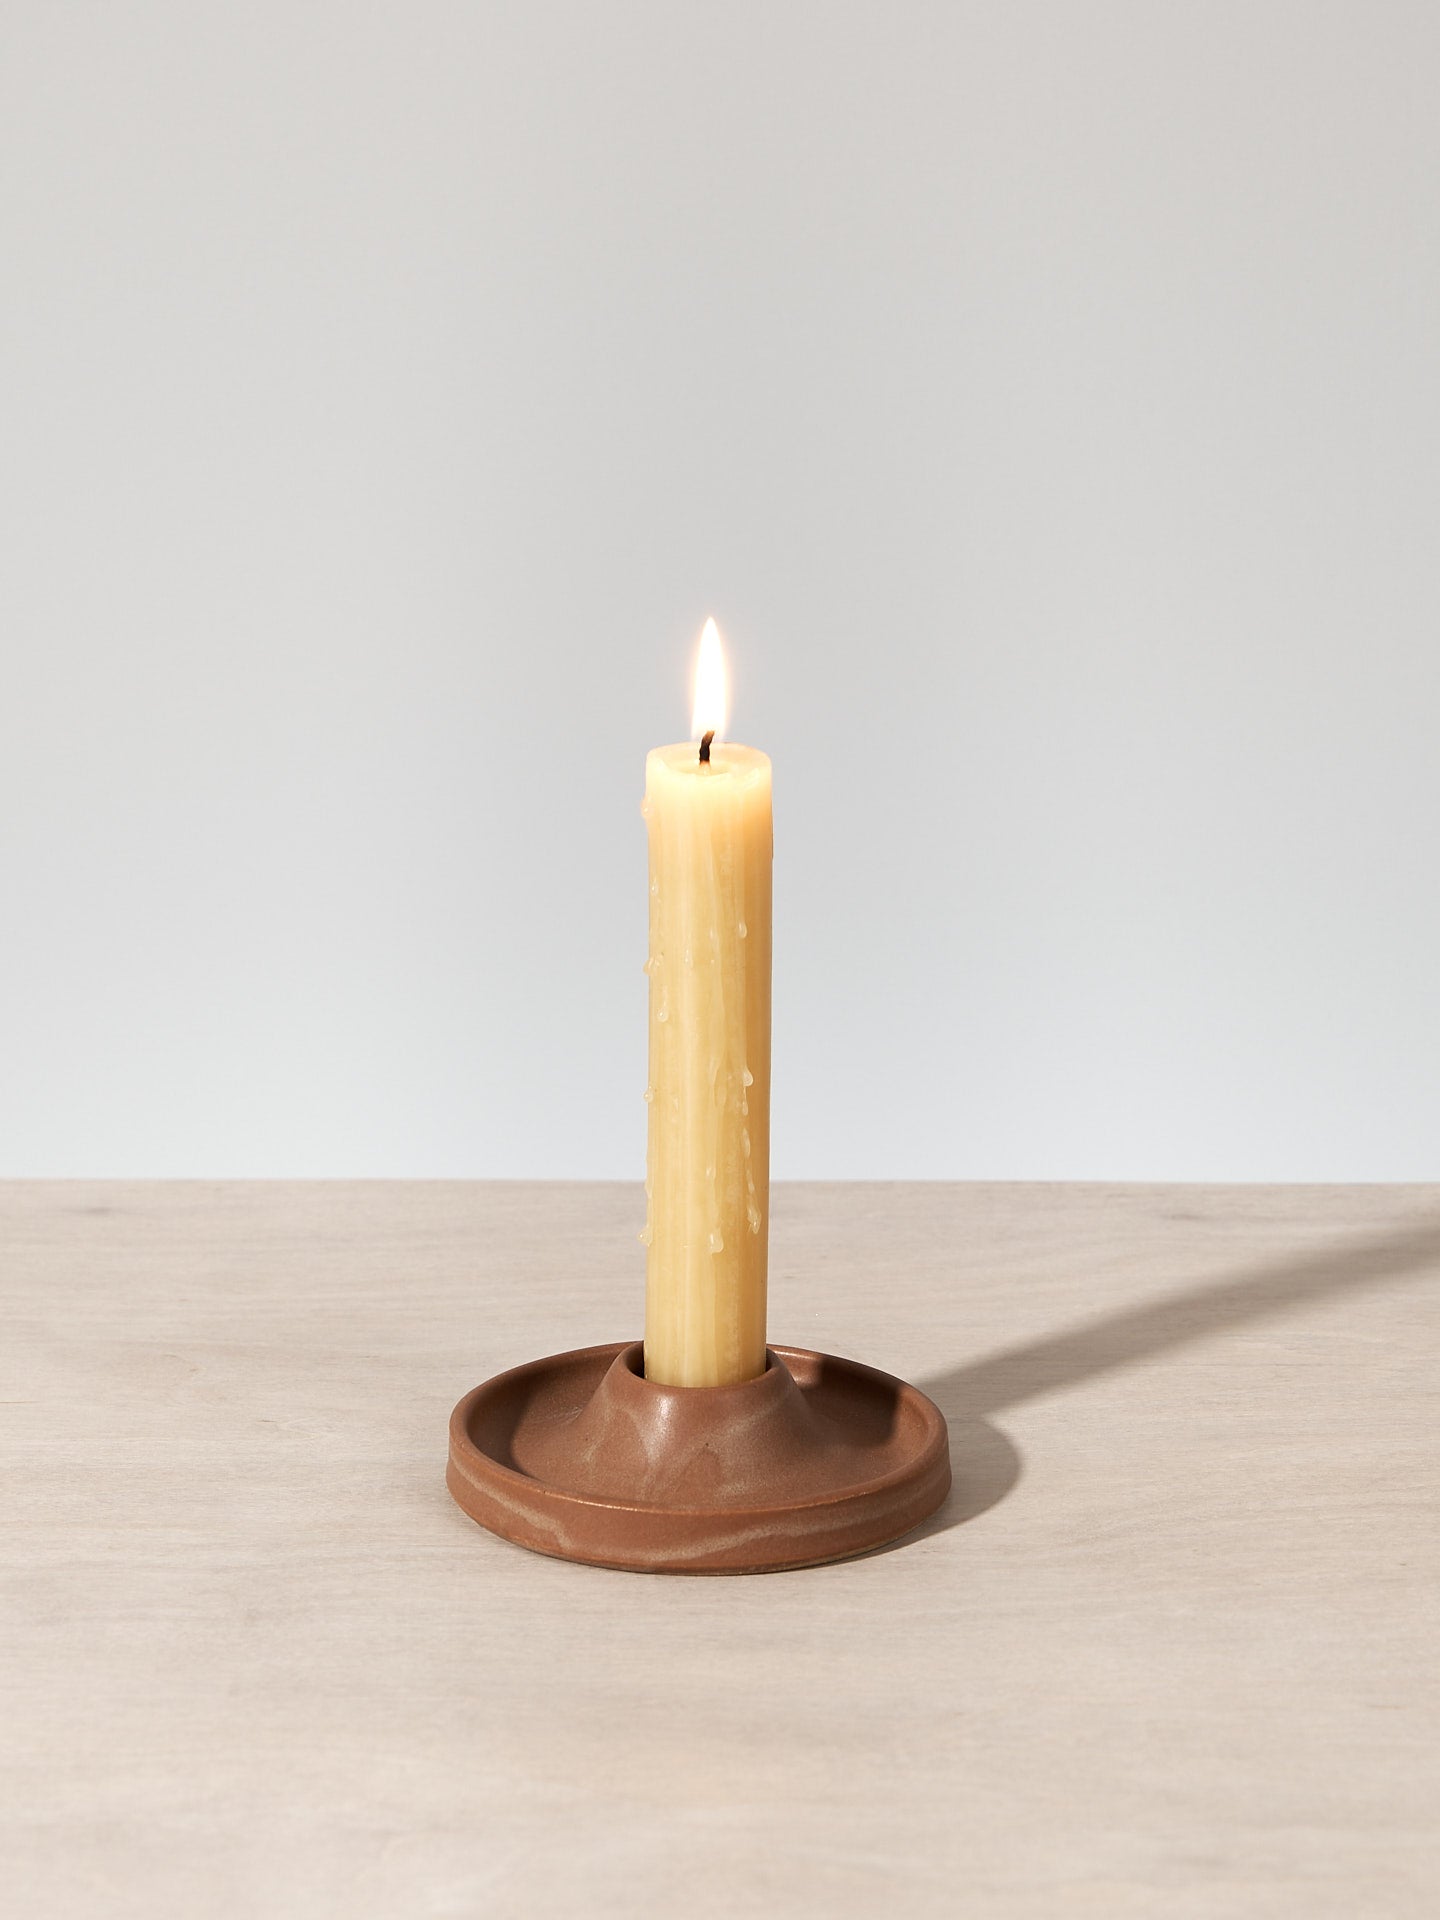 A Deborah Sweeney Candle Holder - Ochre sitting on a wooden table.